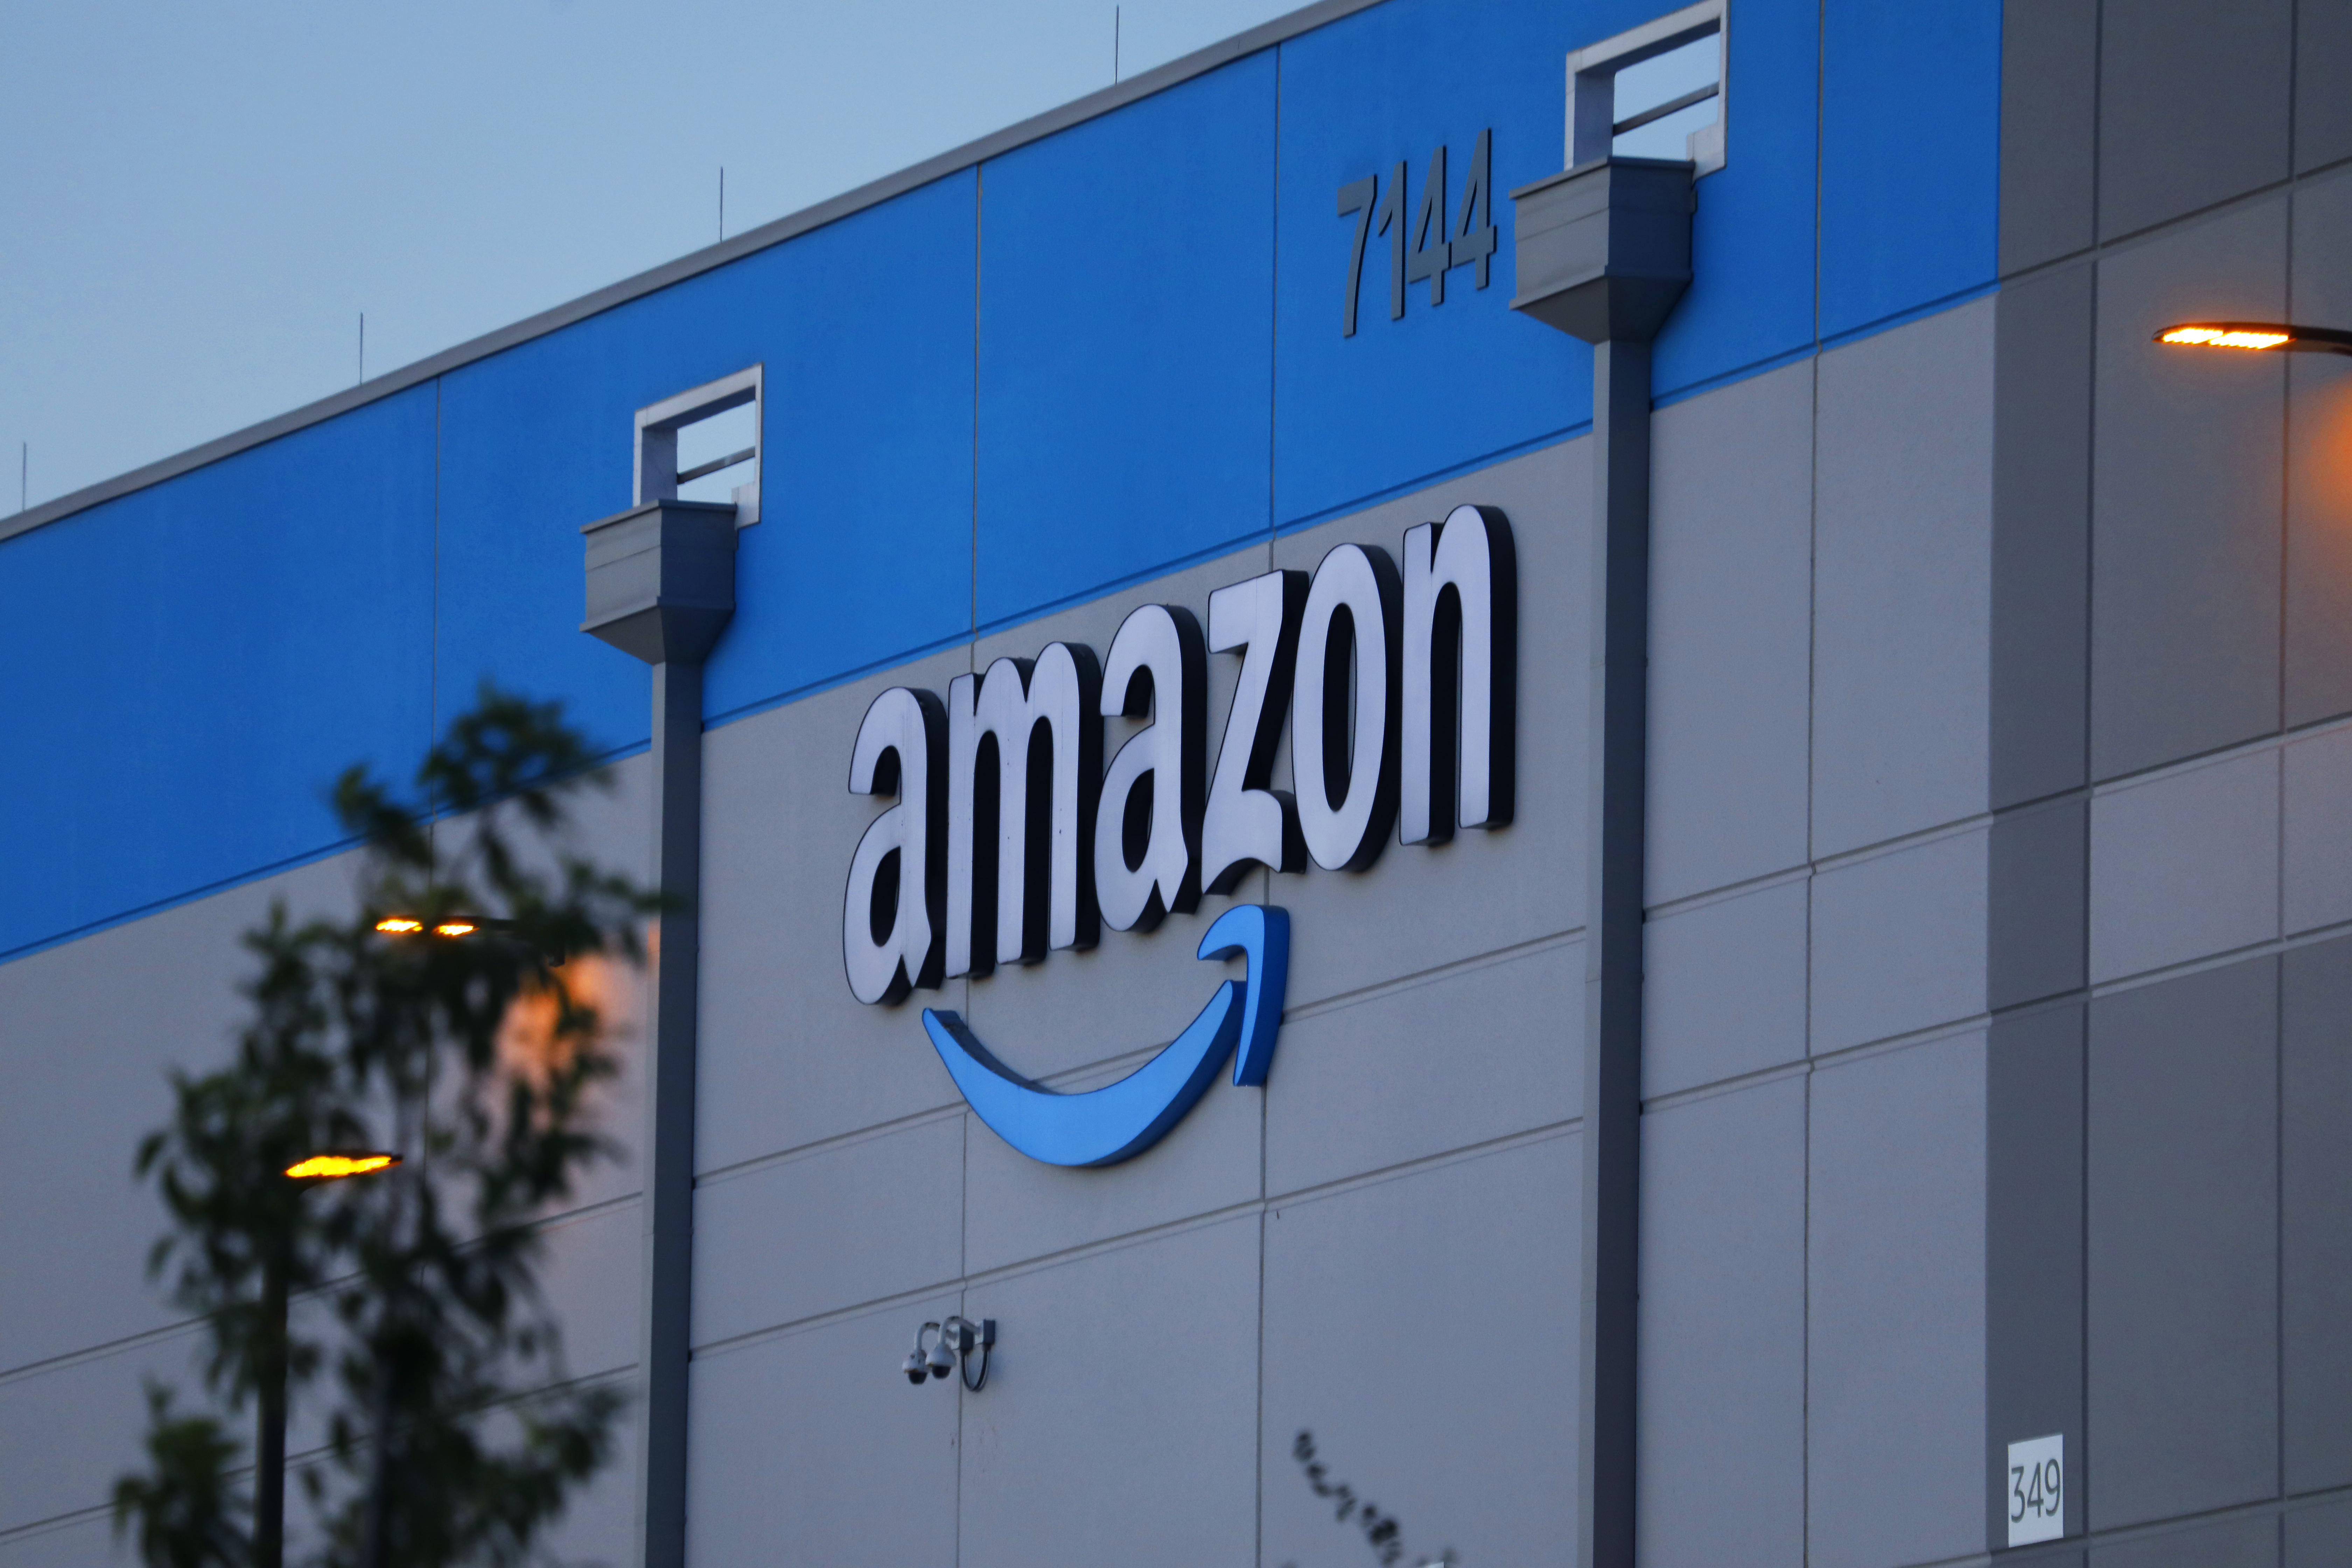 Warehouse workers in Atlanta accuse Amazon of unfair labor practices